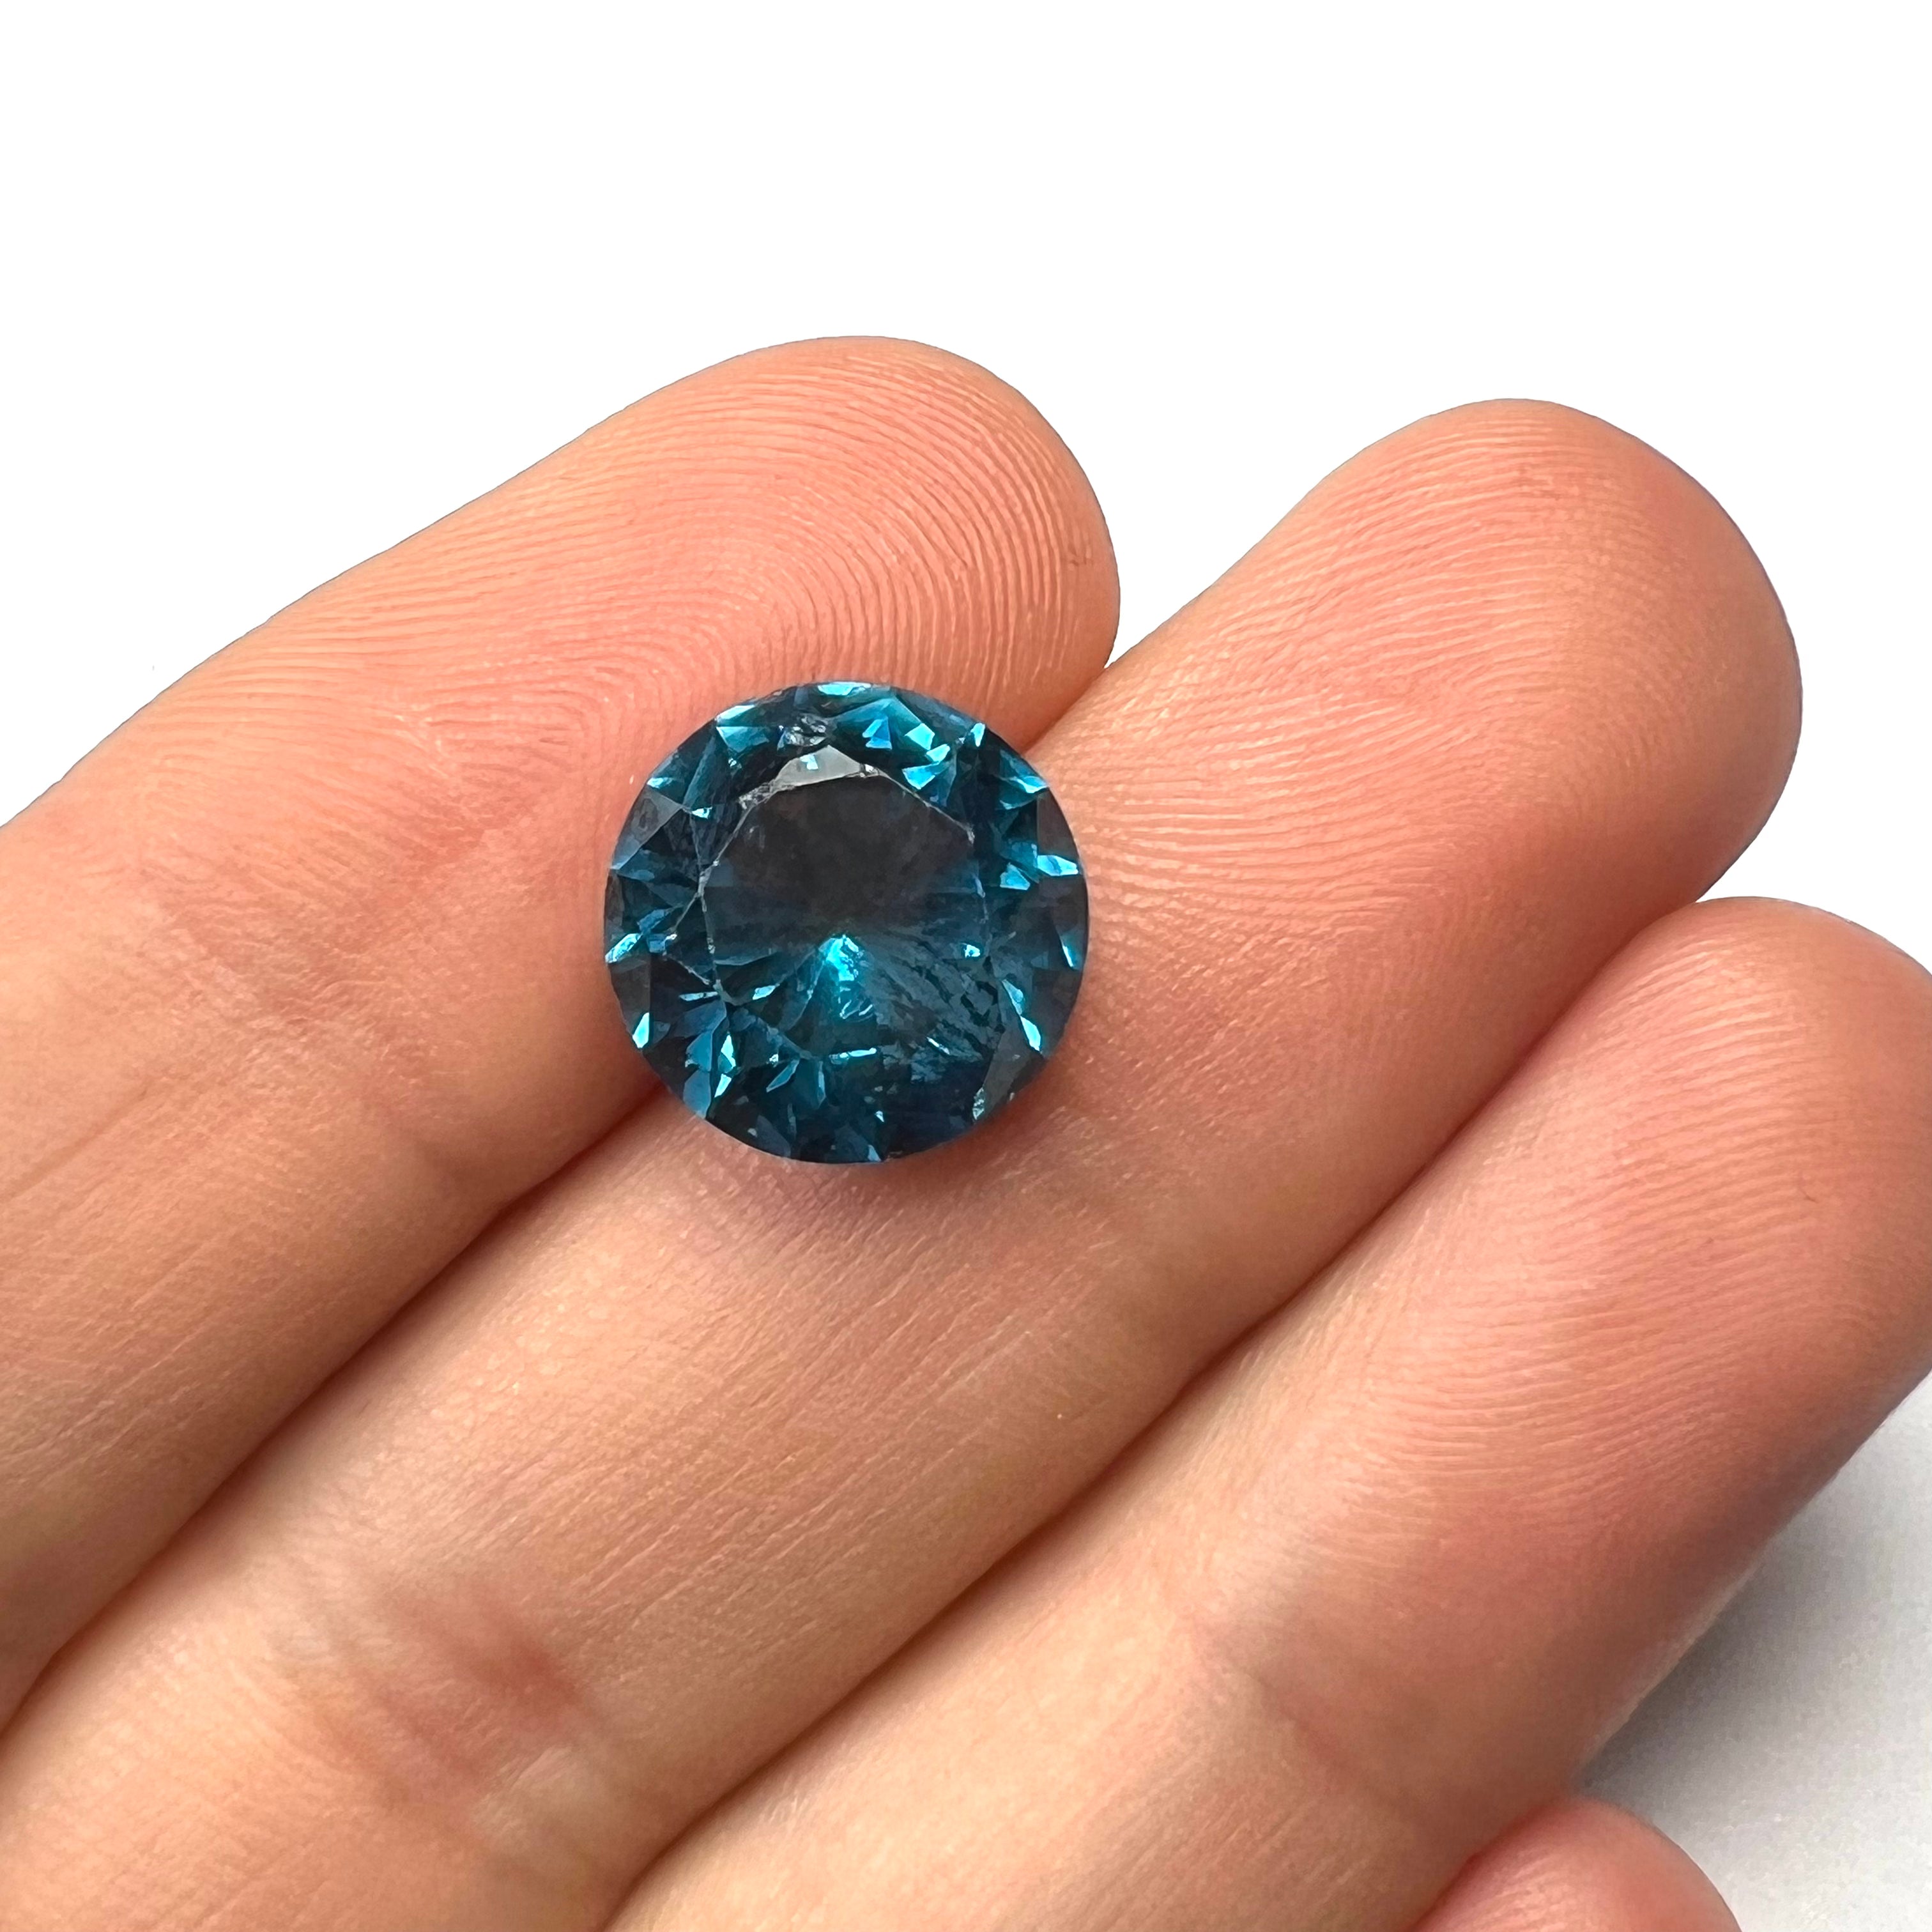 7.3CTW Loose Natural Round Cut Topaz 13x7.35mm Earth mined Gemstone